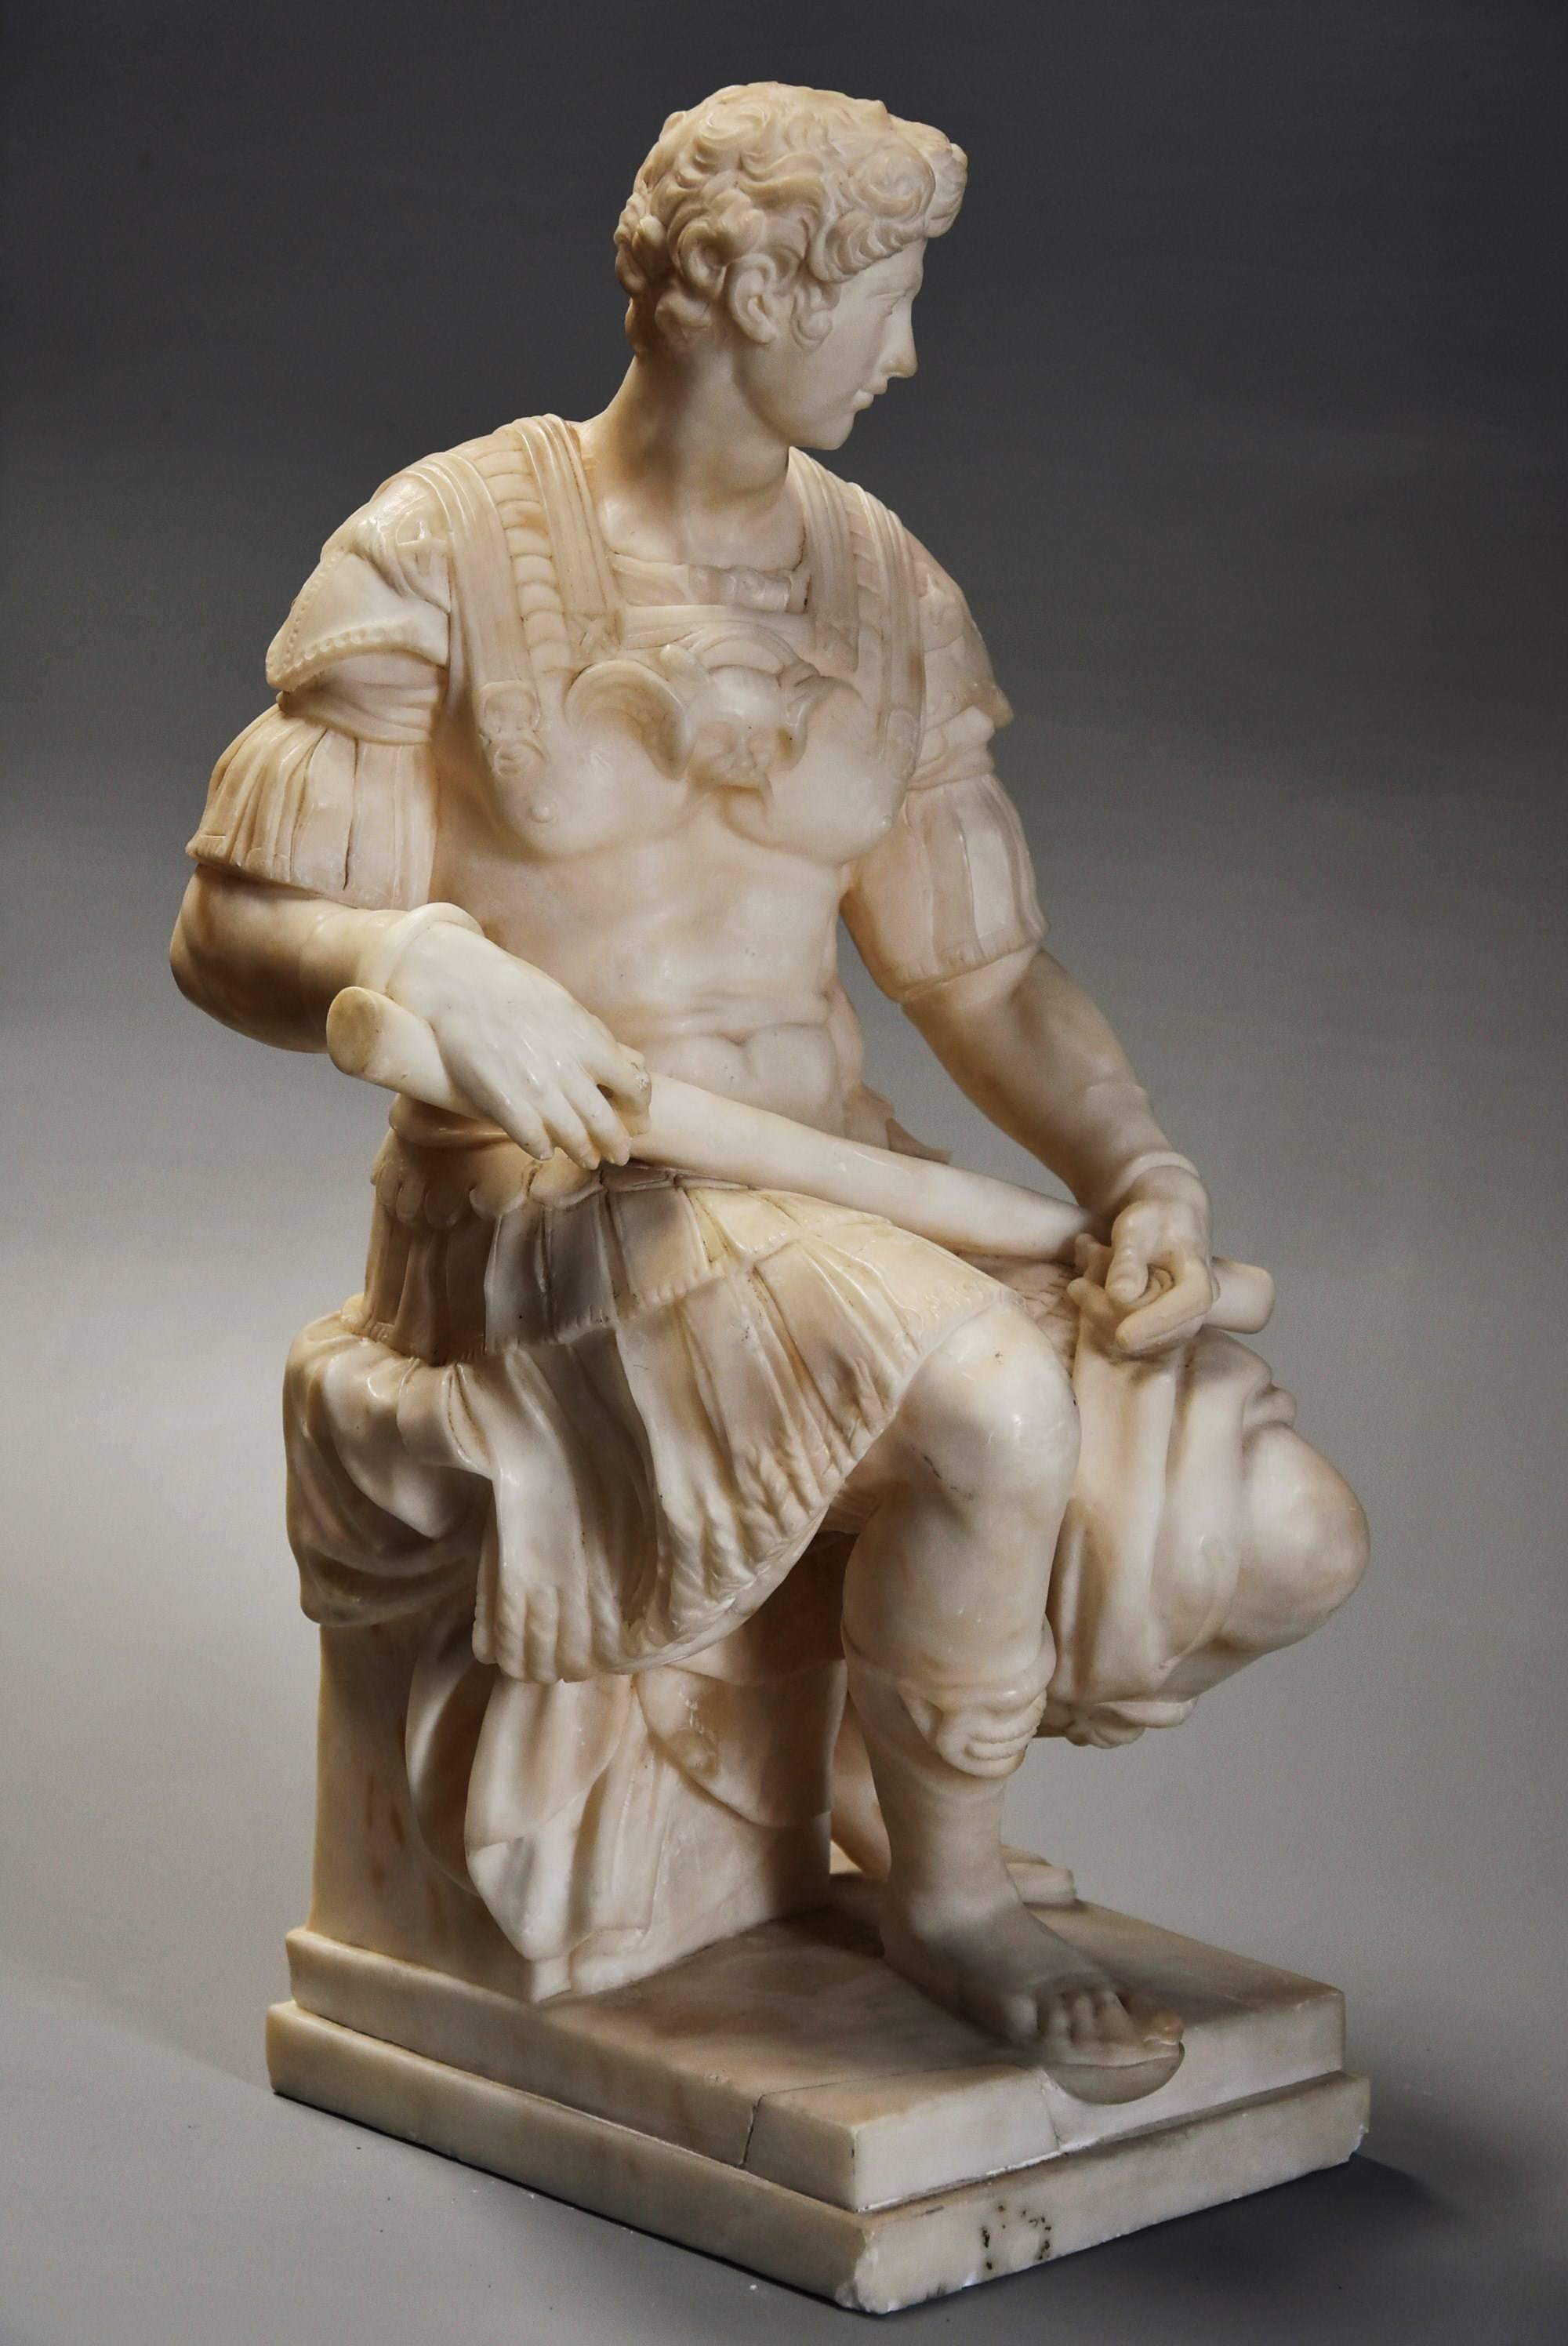 A late 19th century superbly sculpted alabaster figure of Guiliano de Medici, Duke of Nemours (1478-1516), after the antique, the original marble by Michelangelo (1475-1564).

Giuliano de Medici, Duke of Nemours was an Italian nobleman, the